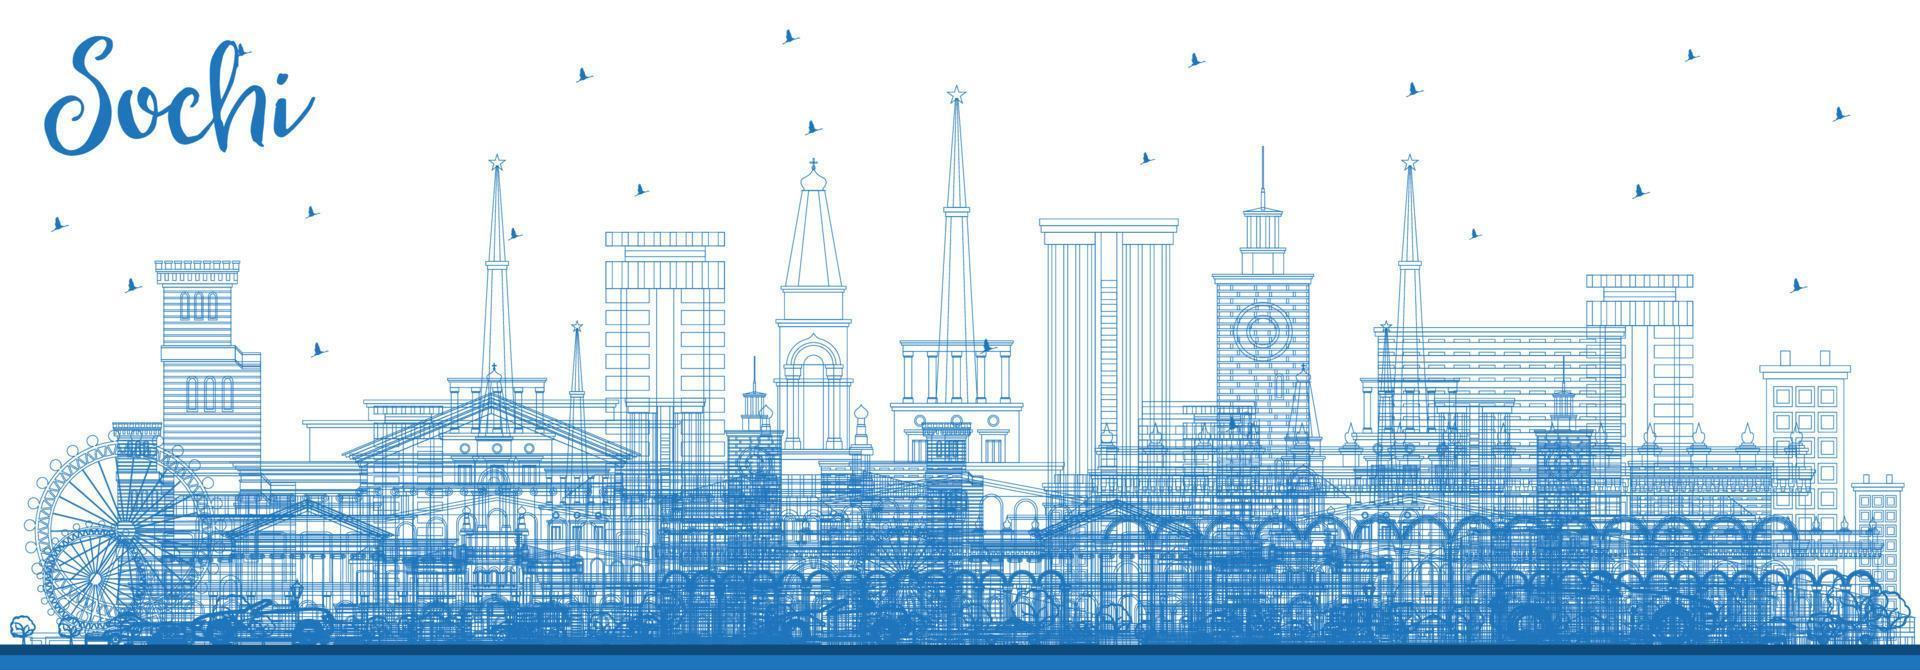 Outline Sochi Russia City Skyline with Blue Buildings. vector